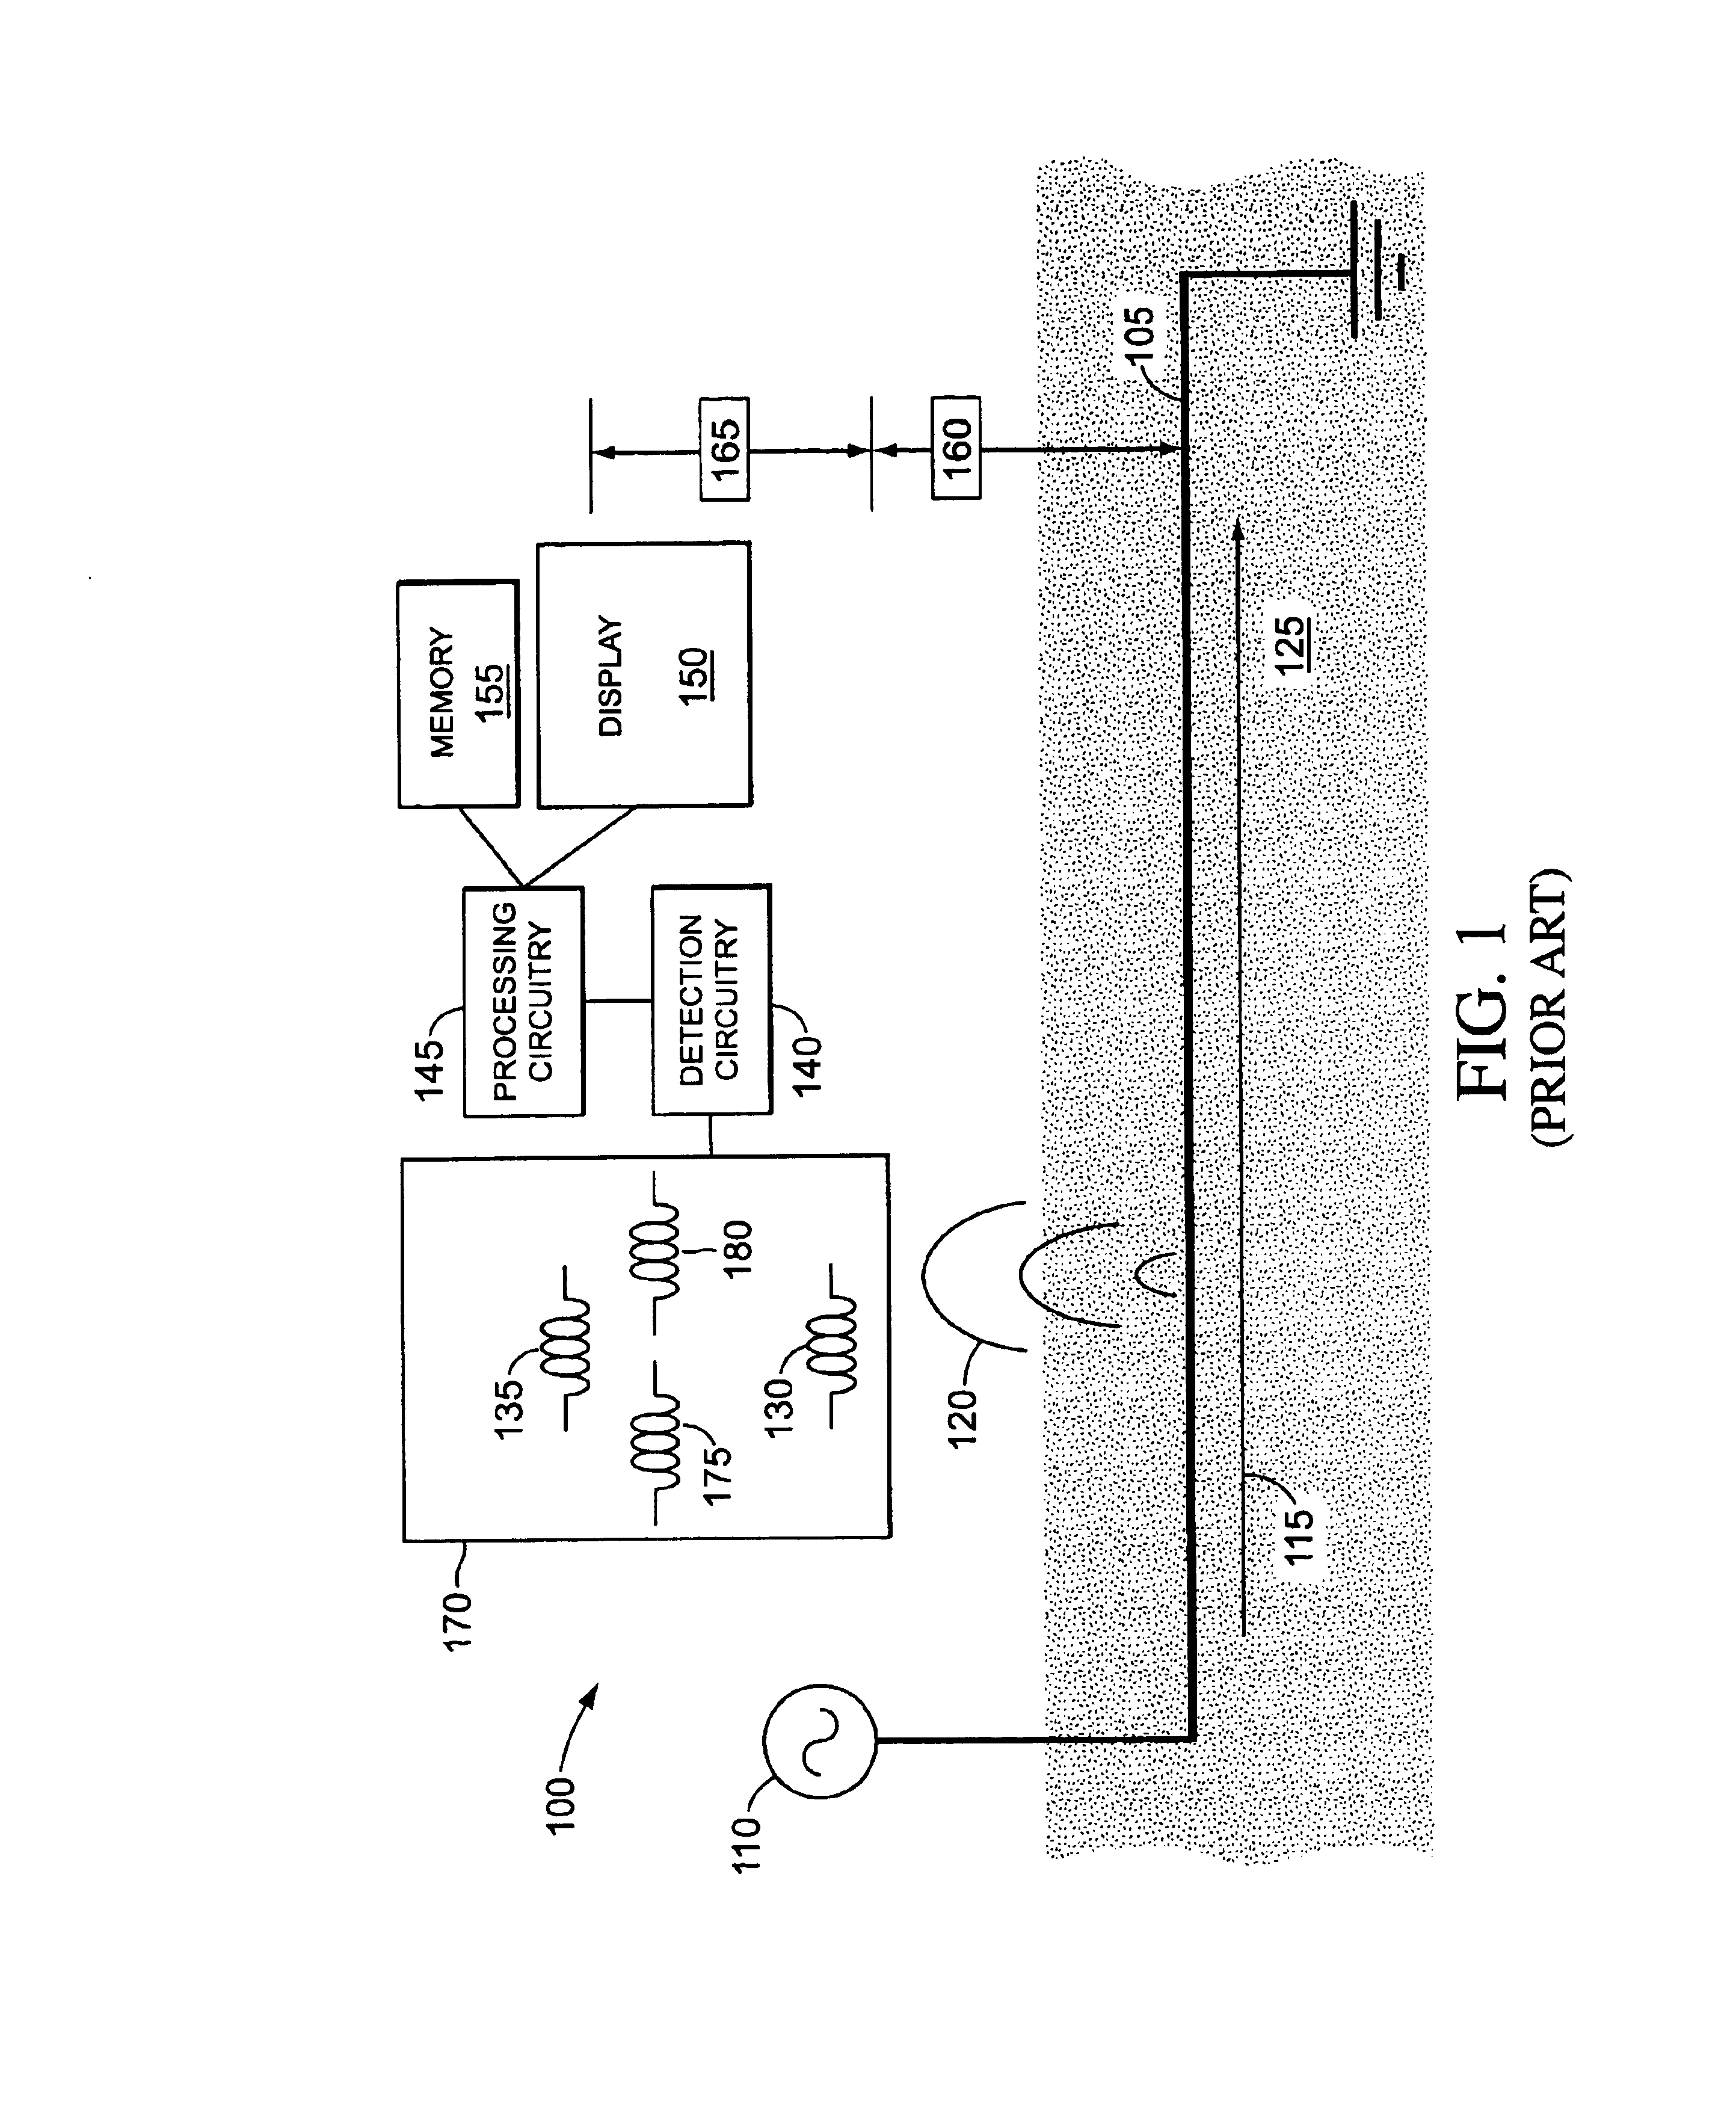 Buried line locator with integral position sensing